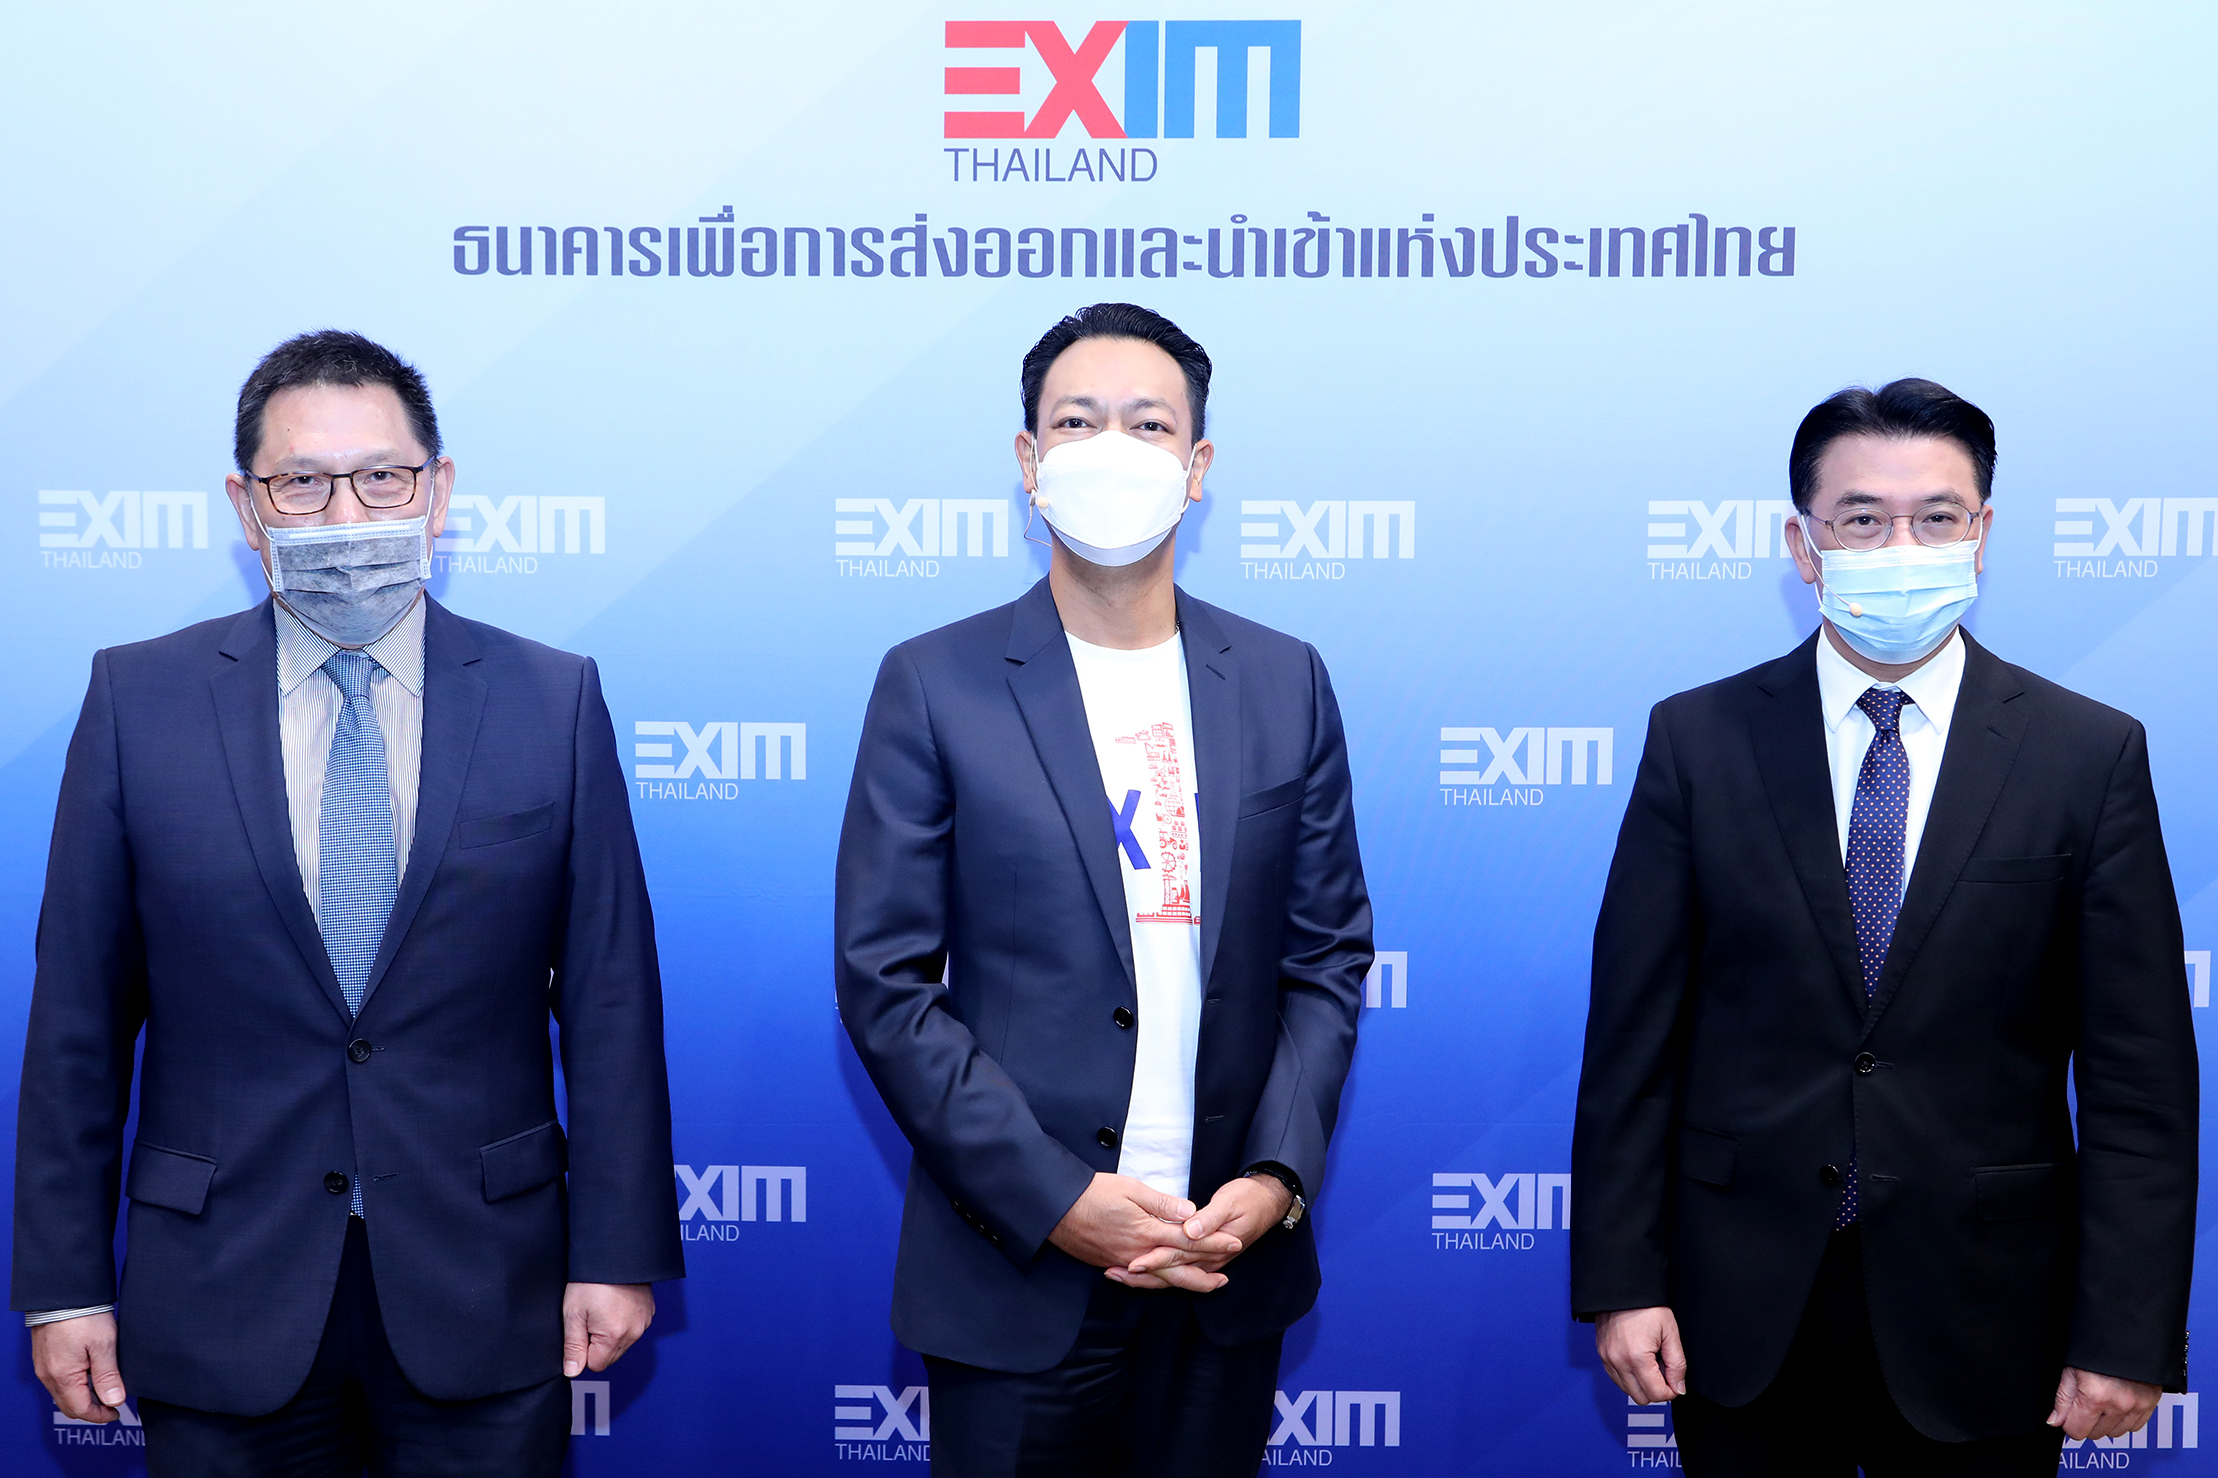 EXIM Thailand Launches “EXIM Thailand Pavilion” Online Trade Platform with Full-fledged Services to Build “Brand-new Exporters”  to Penetrate the Next Normal Global Market